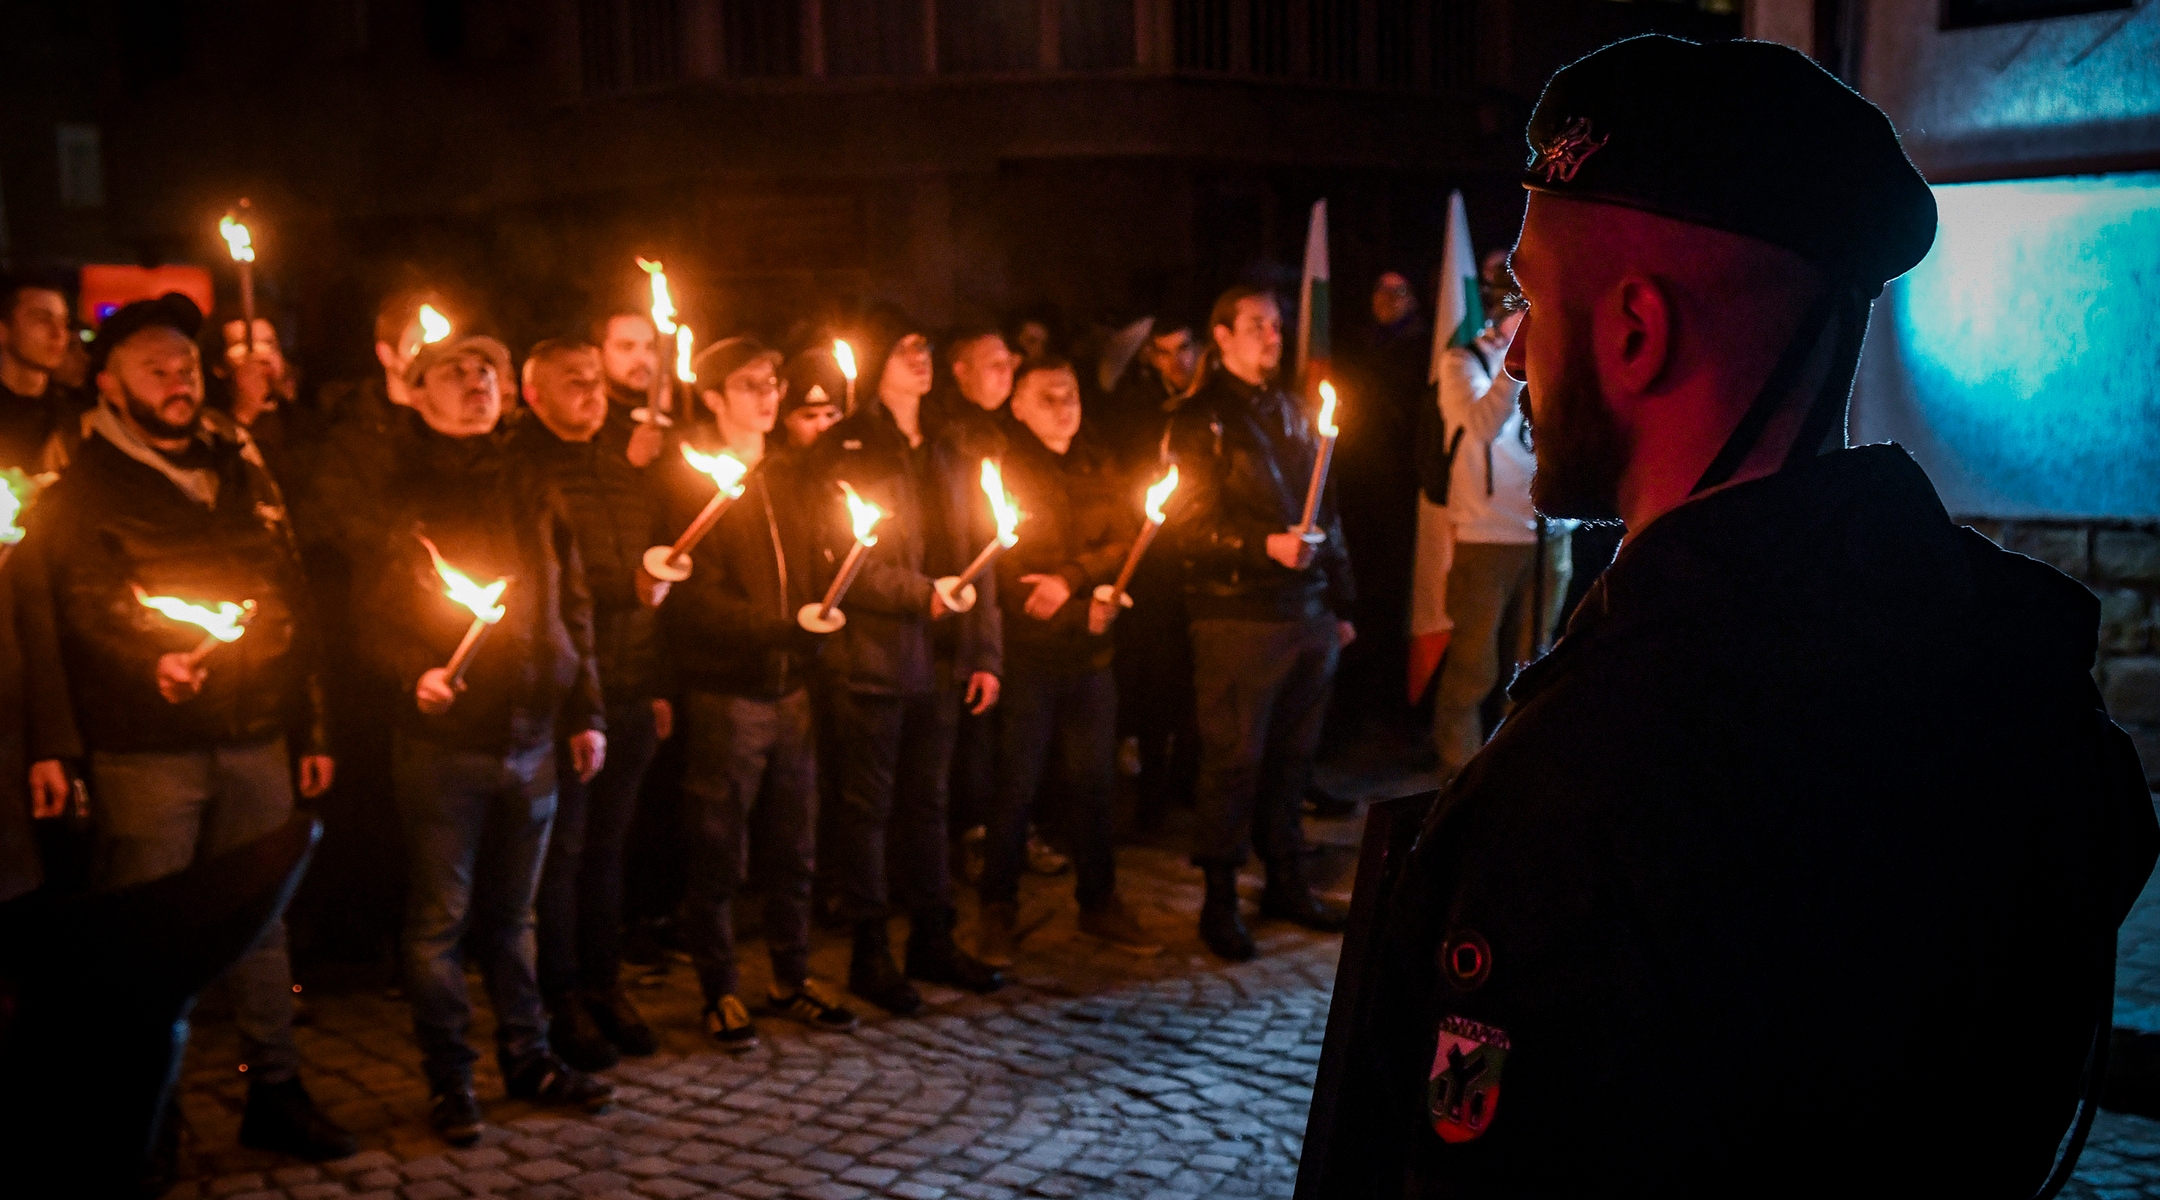 Far-right groups and nationalists carry torches and march to commemorate the Nazi-era Bulgarian General Hristo Lukov in Sofia, Bulgaria, Feb. 12, 2022. (Georgi Paleykov/NurPhoto via Getty Images)